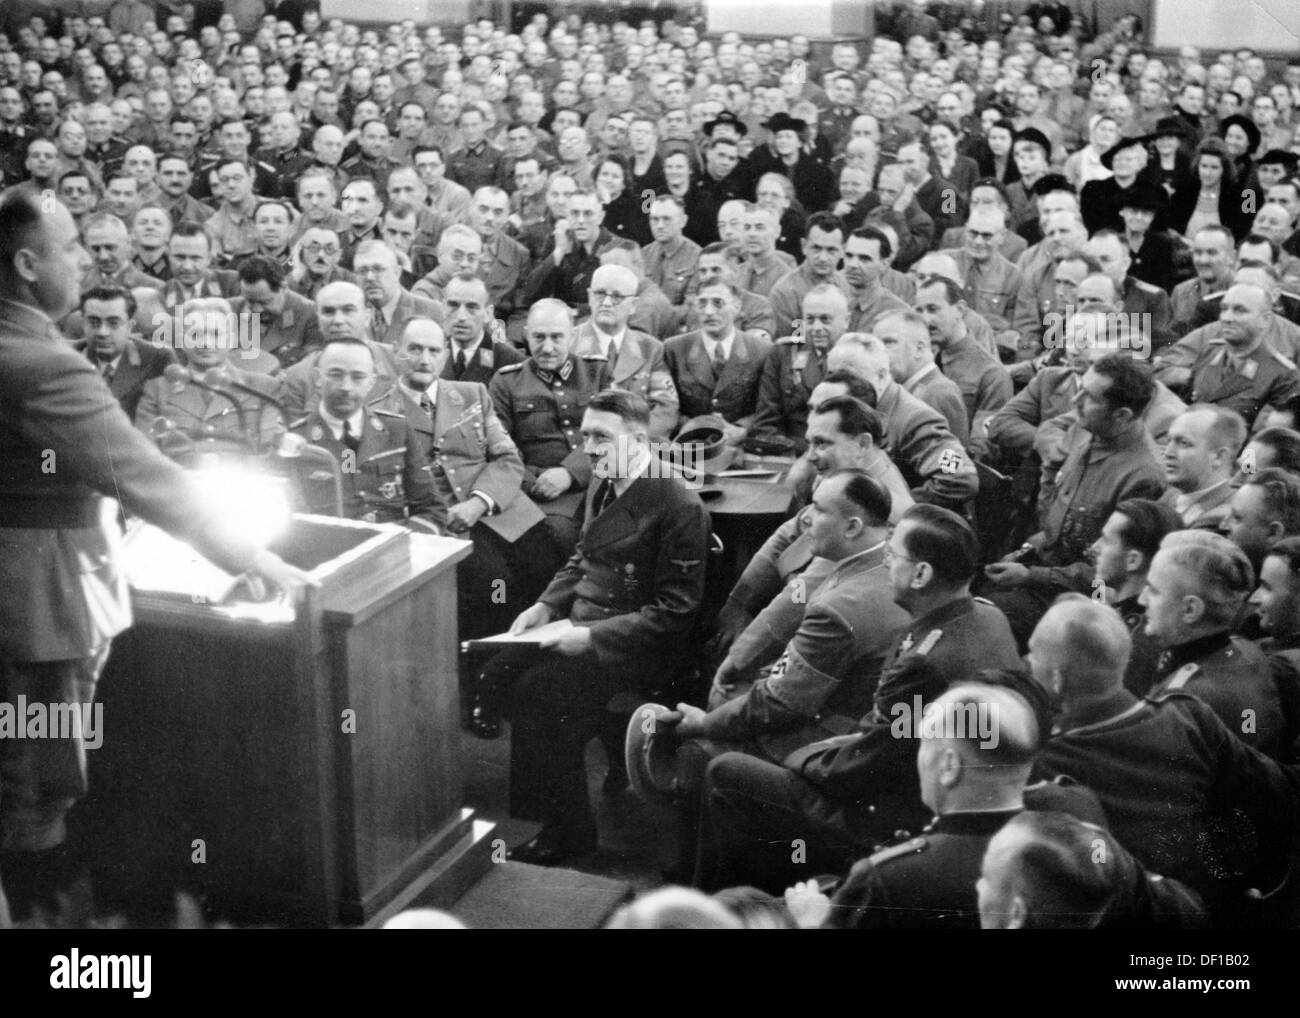 The image from the Nazi Propaganda! shows Adolf Hitler among his 'old comrades' during an hour of commemoration on the occasion of the anniversary of the Beer Hall Putsch of 9 November 1923 in Löwenbräukeller in Munich, Germany, on 9 November 1934(?). Personalities: at the speaker's desk Gauleiter Paul Giesler. To Hitler's right: Hermann Göring, behind him (at the table, partially covered): Joseph Goebbels, Robert Ley, Max Amann, Hermann Esser. Behind the table (r-l): Wilhelm Schepman, Karl Fiehler, Franz Xaver Schwarz. In Front of Schwarz, Konstantin Hierl, to the left Franz Ritter von Epp an Stock Photo